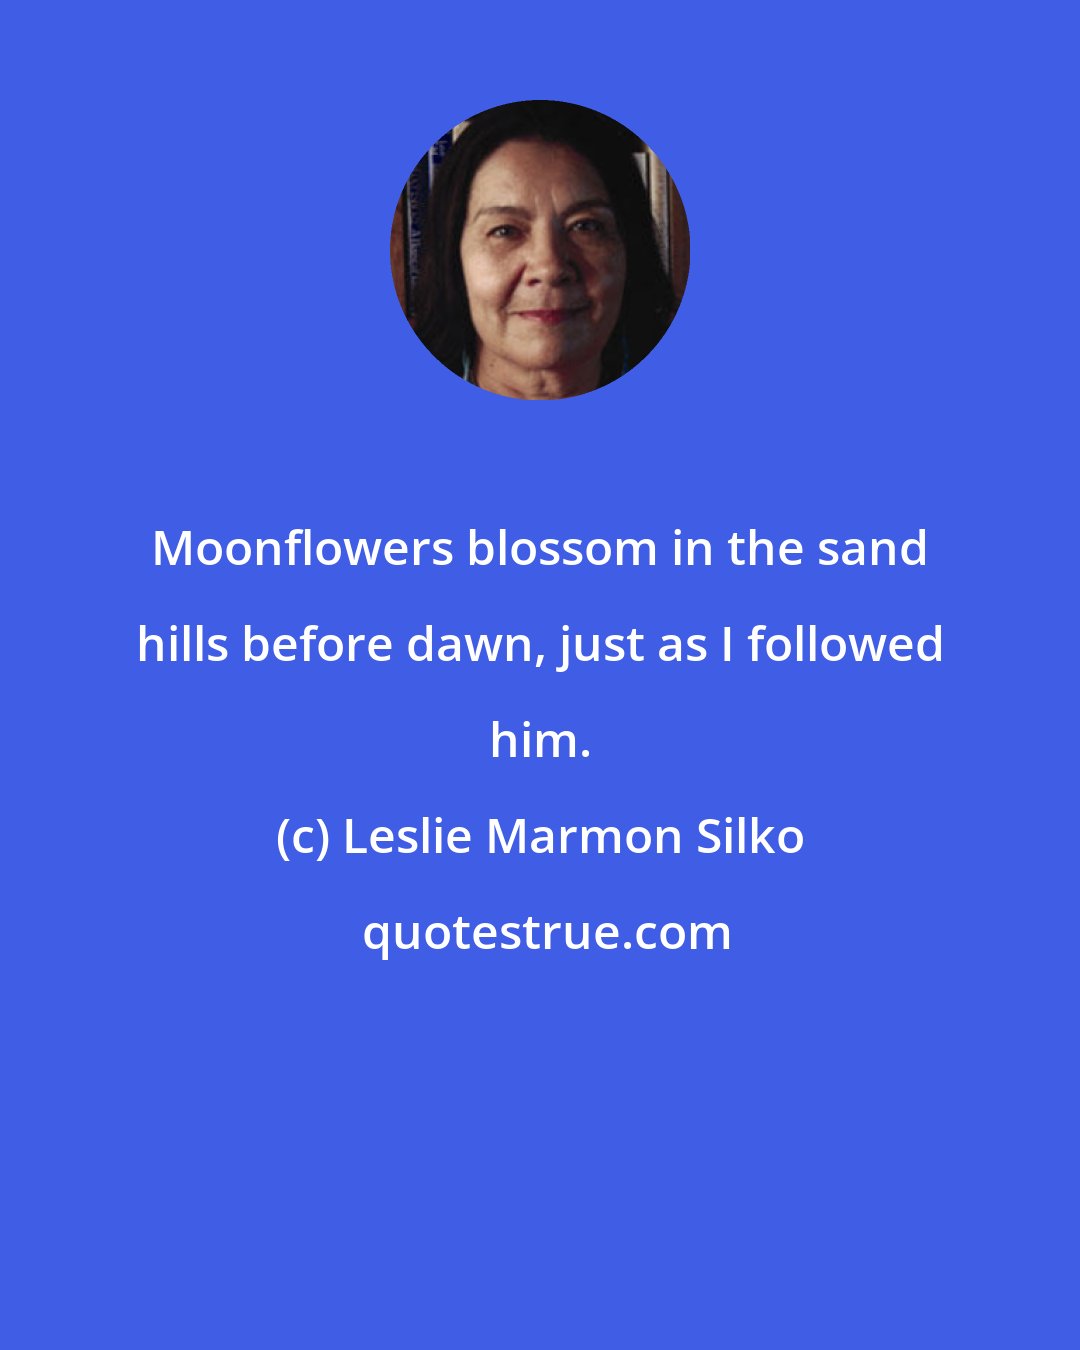 Leslie Marmon Silko: Moonflowers blossom in the sand hills before dawn, just as I followed him.